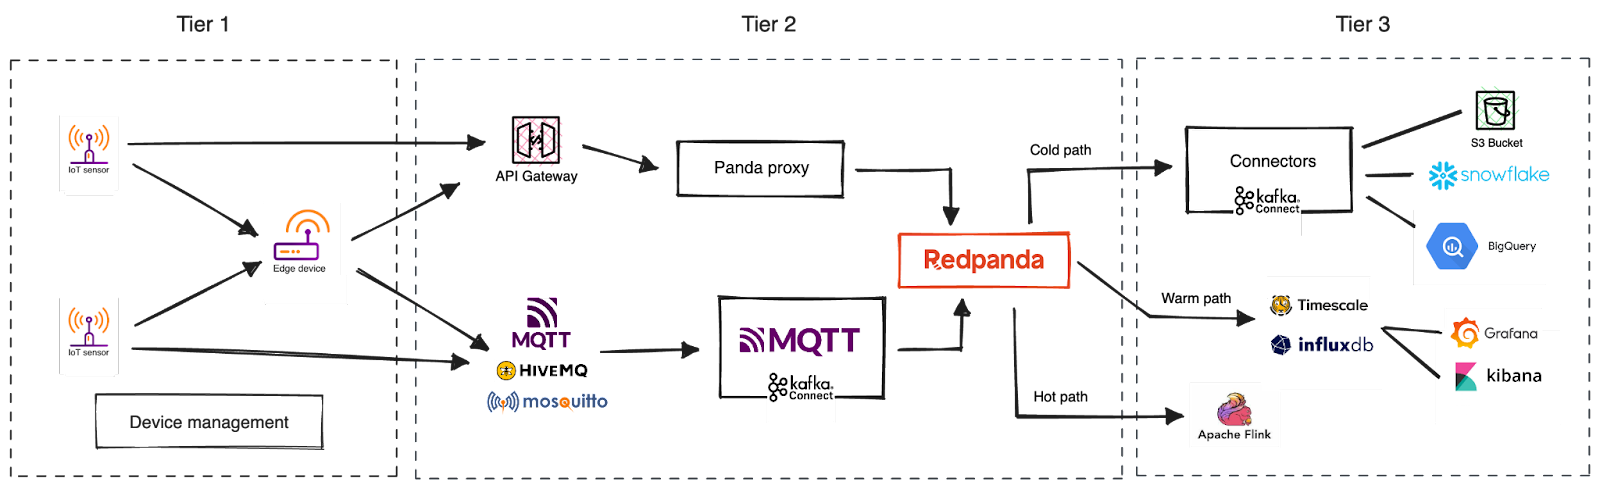 Reference architecture for a scalable IoT platform